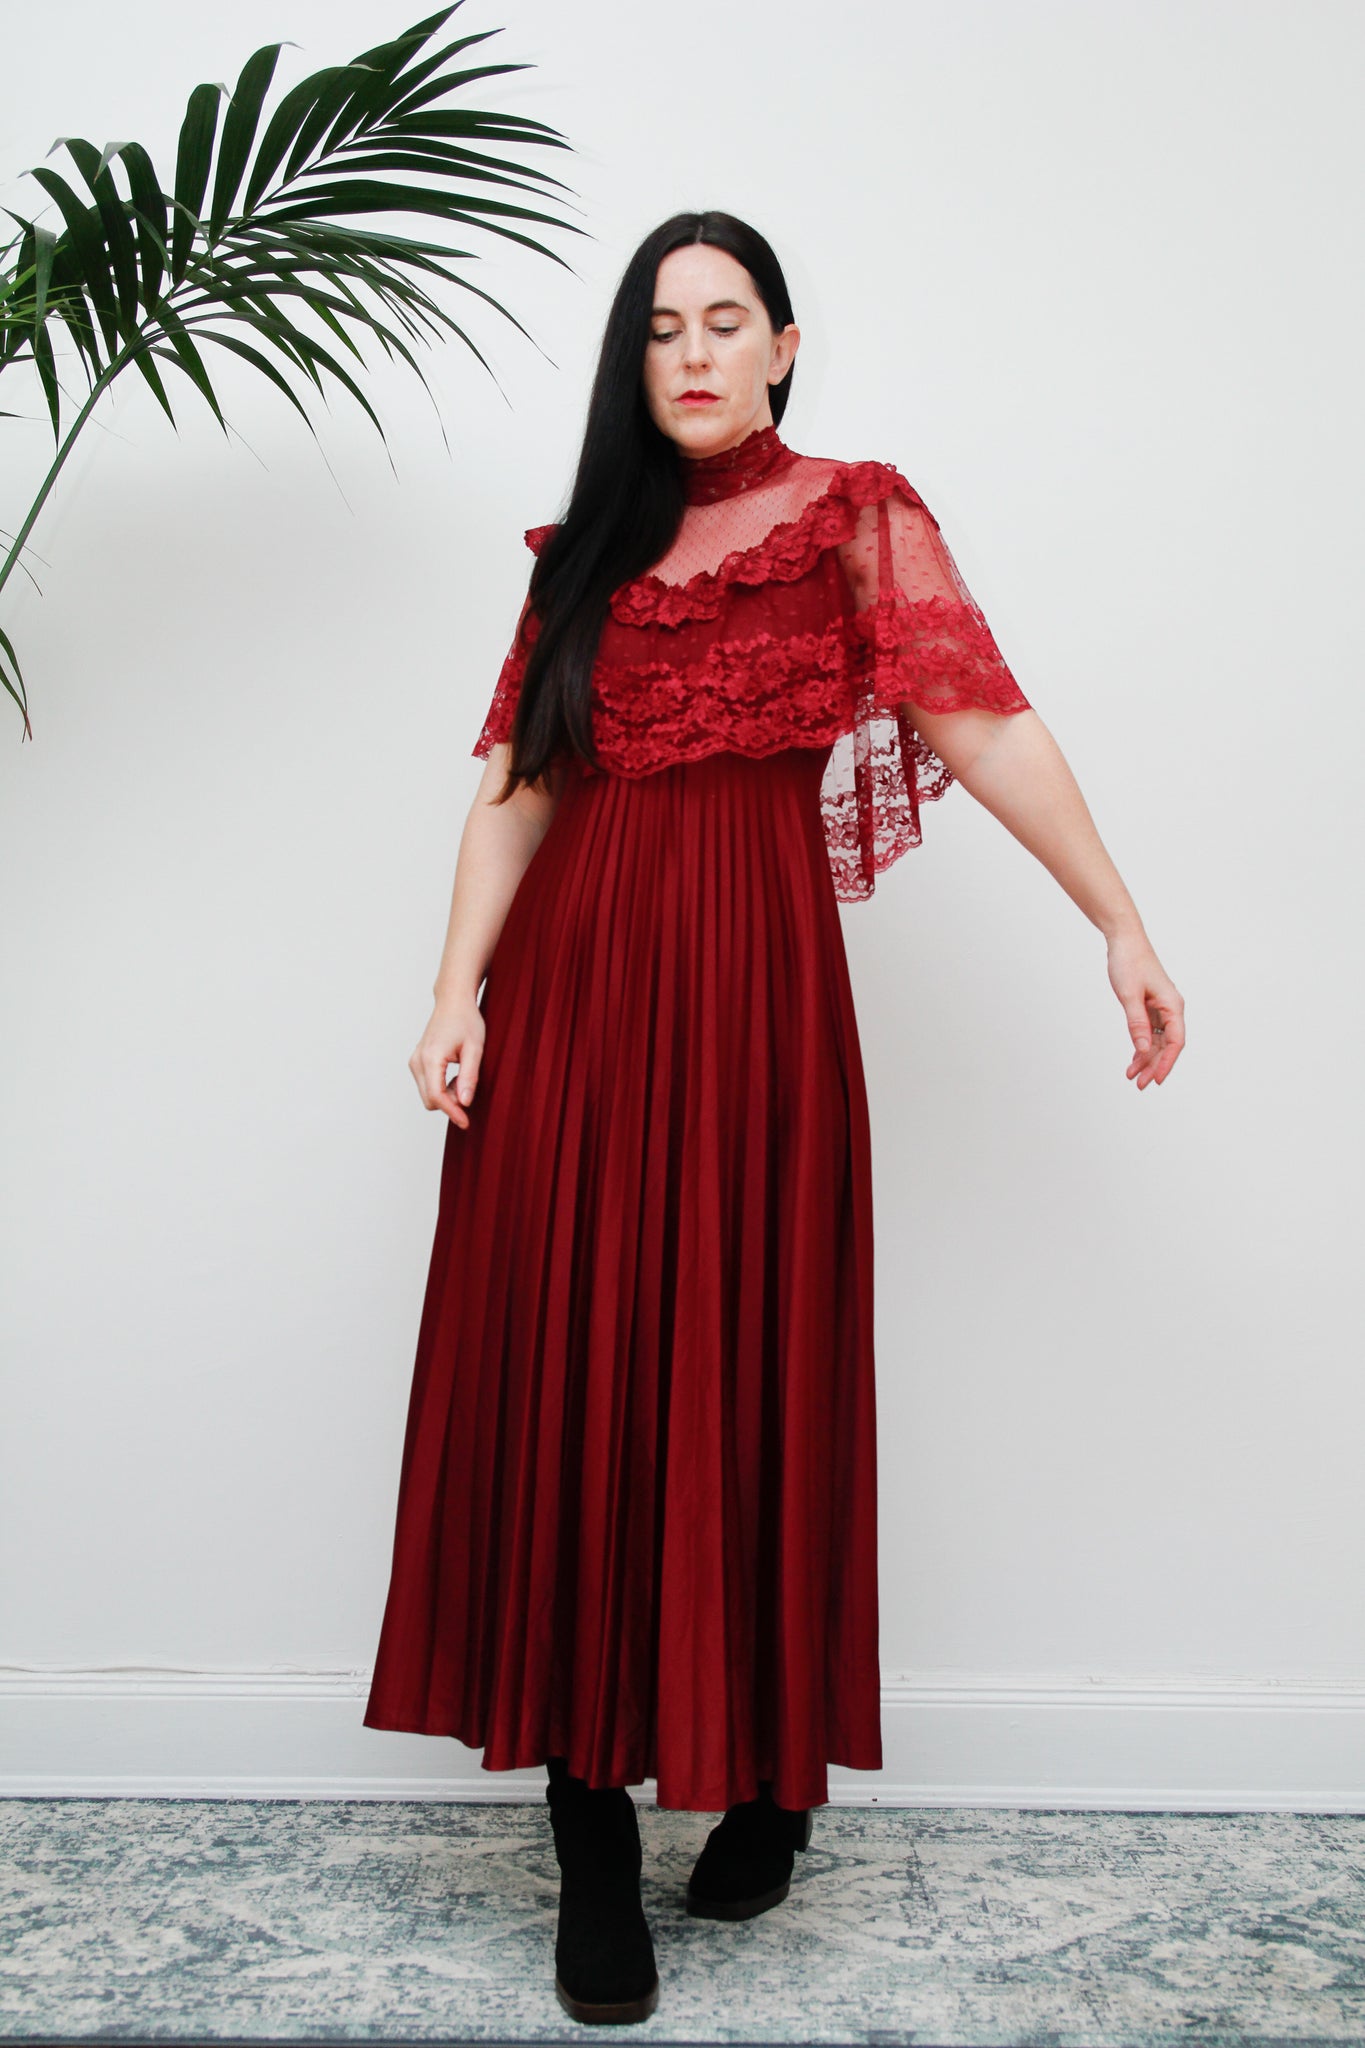 1970's Floral Lace Gothic Victorian Pleated Maxi Dress